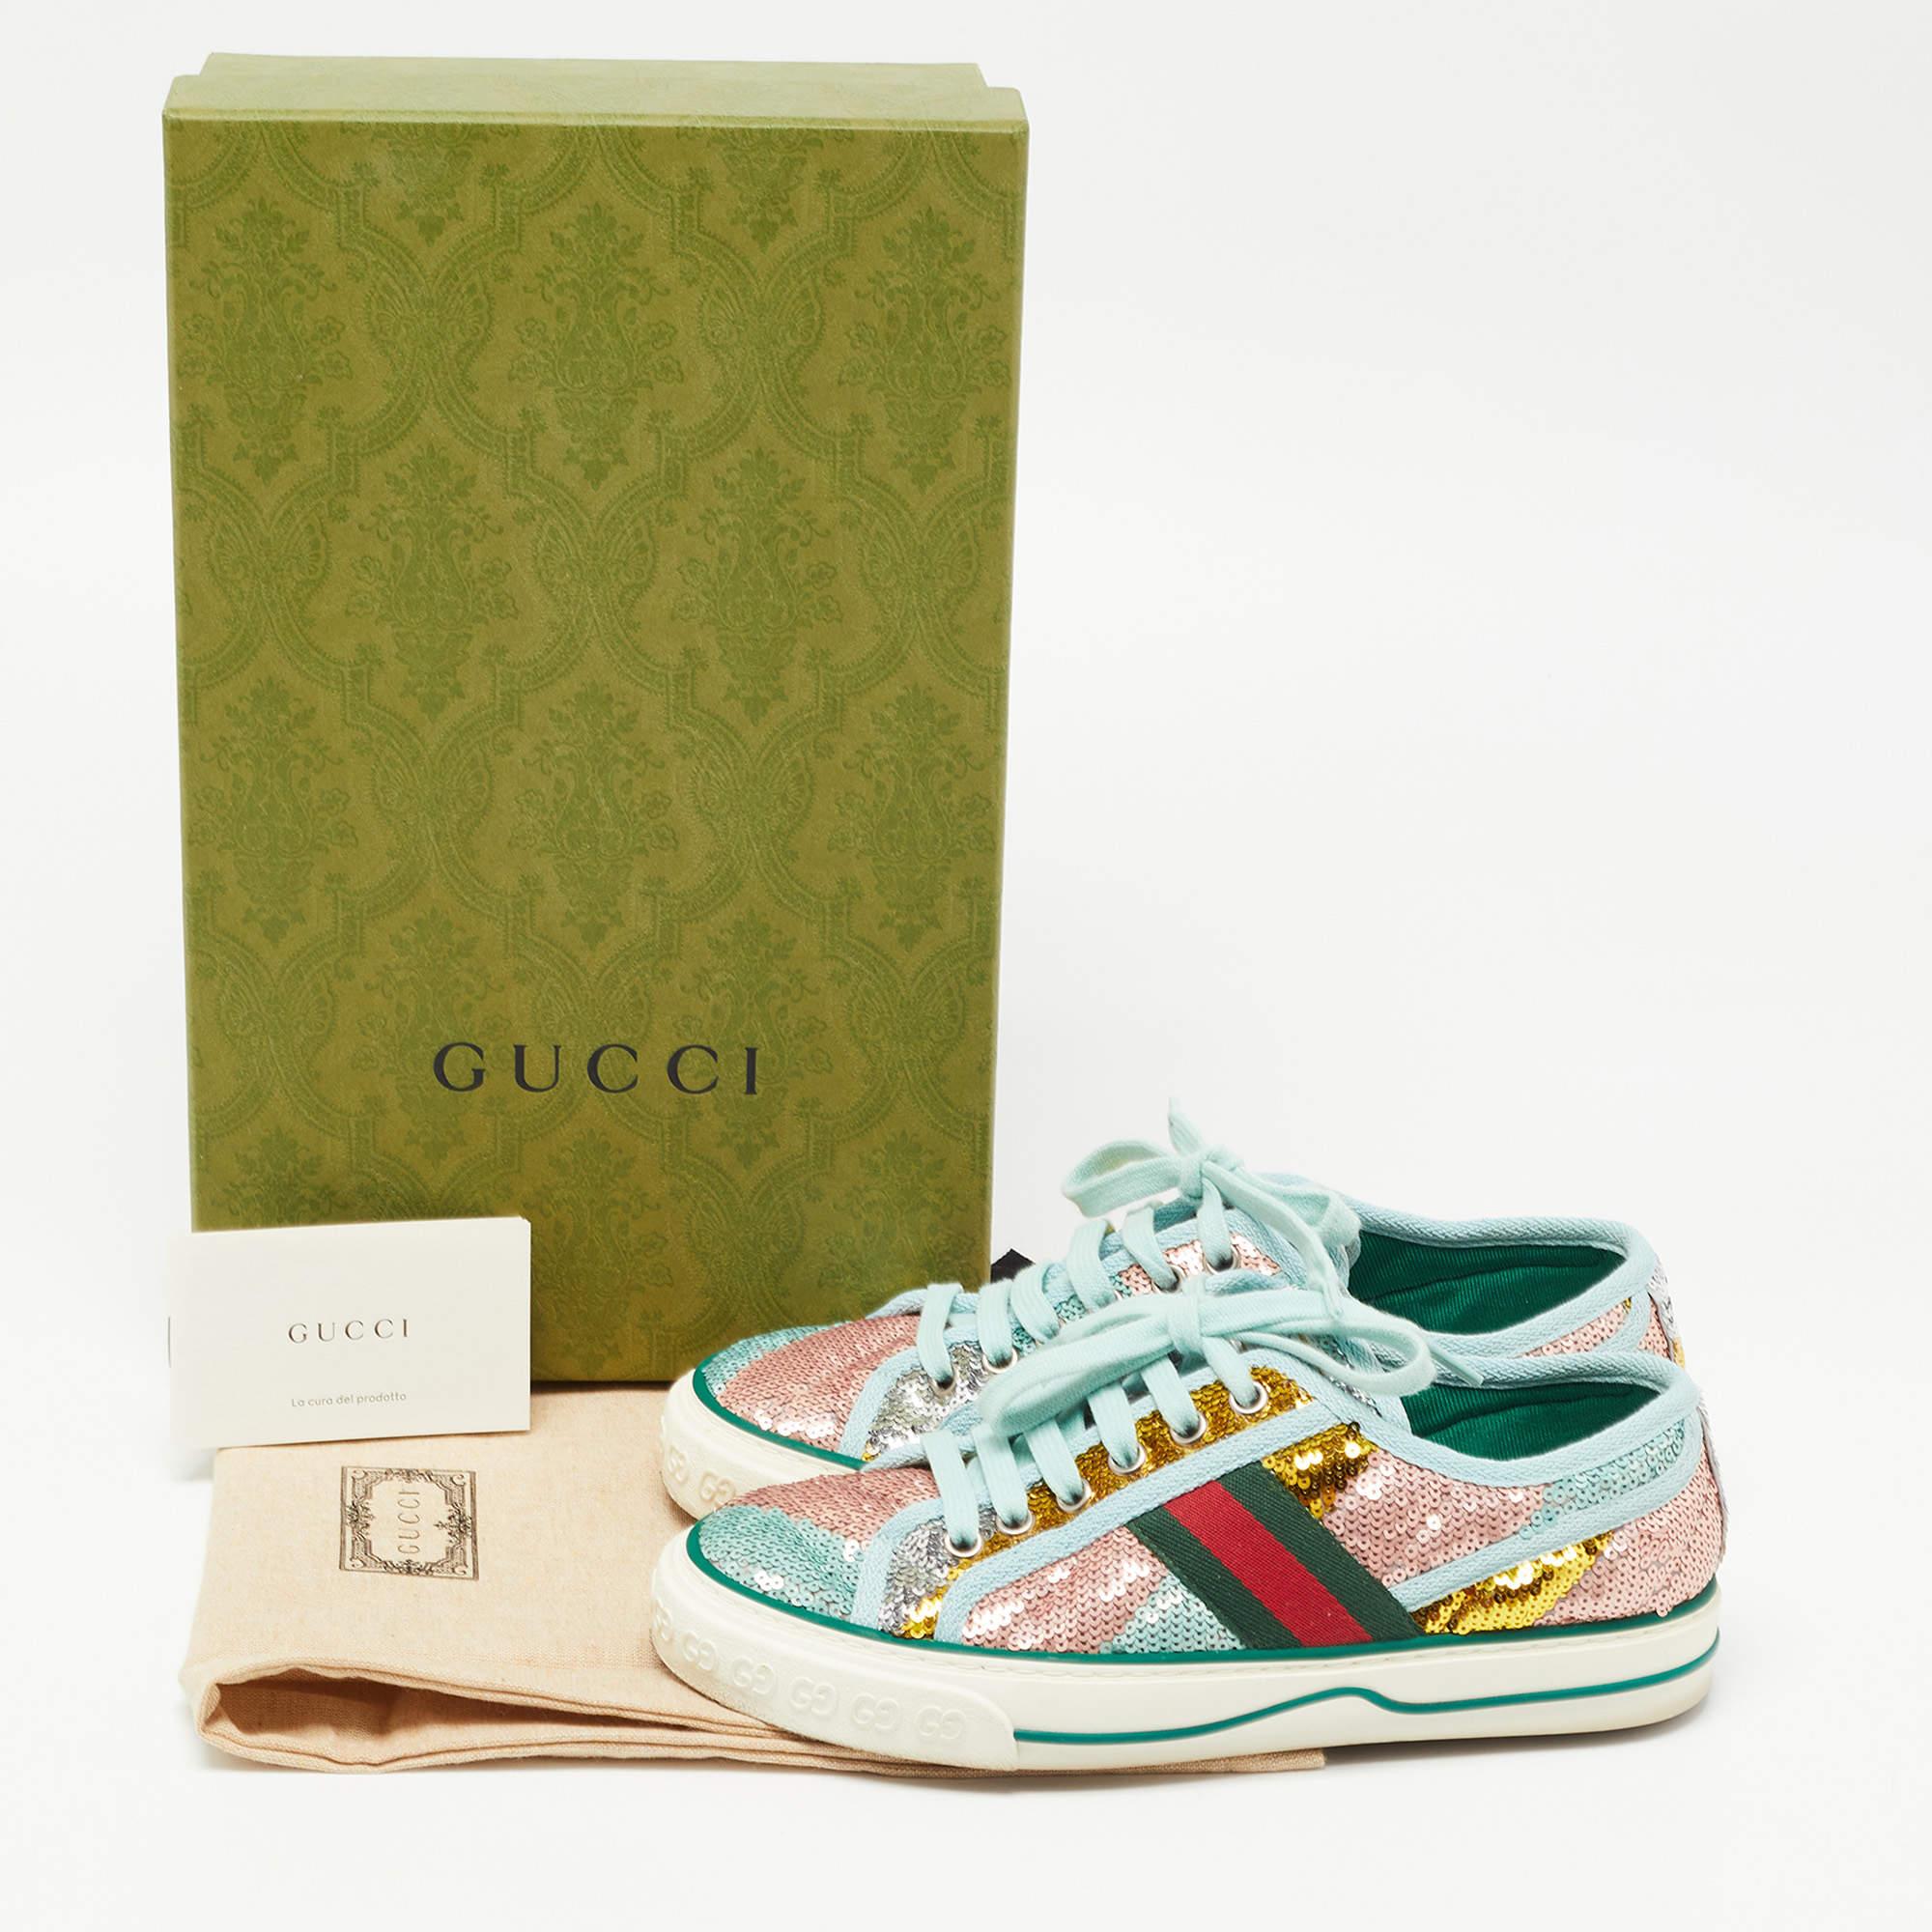 Gucci Multicolor Canvas and Sequin Tennis 1977 Sneakers Size 35.5 5